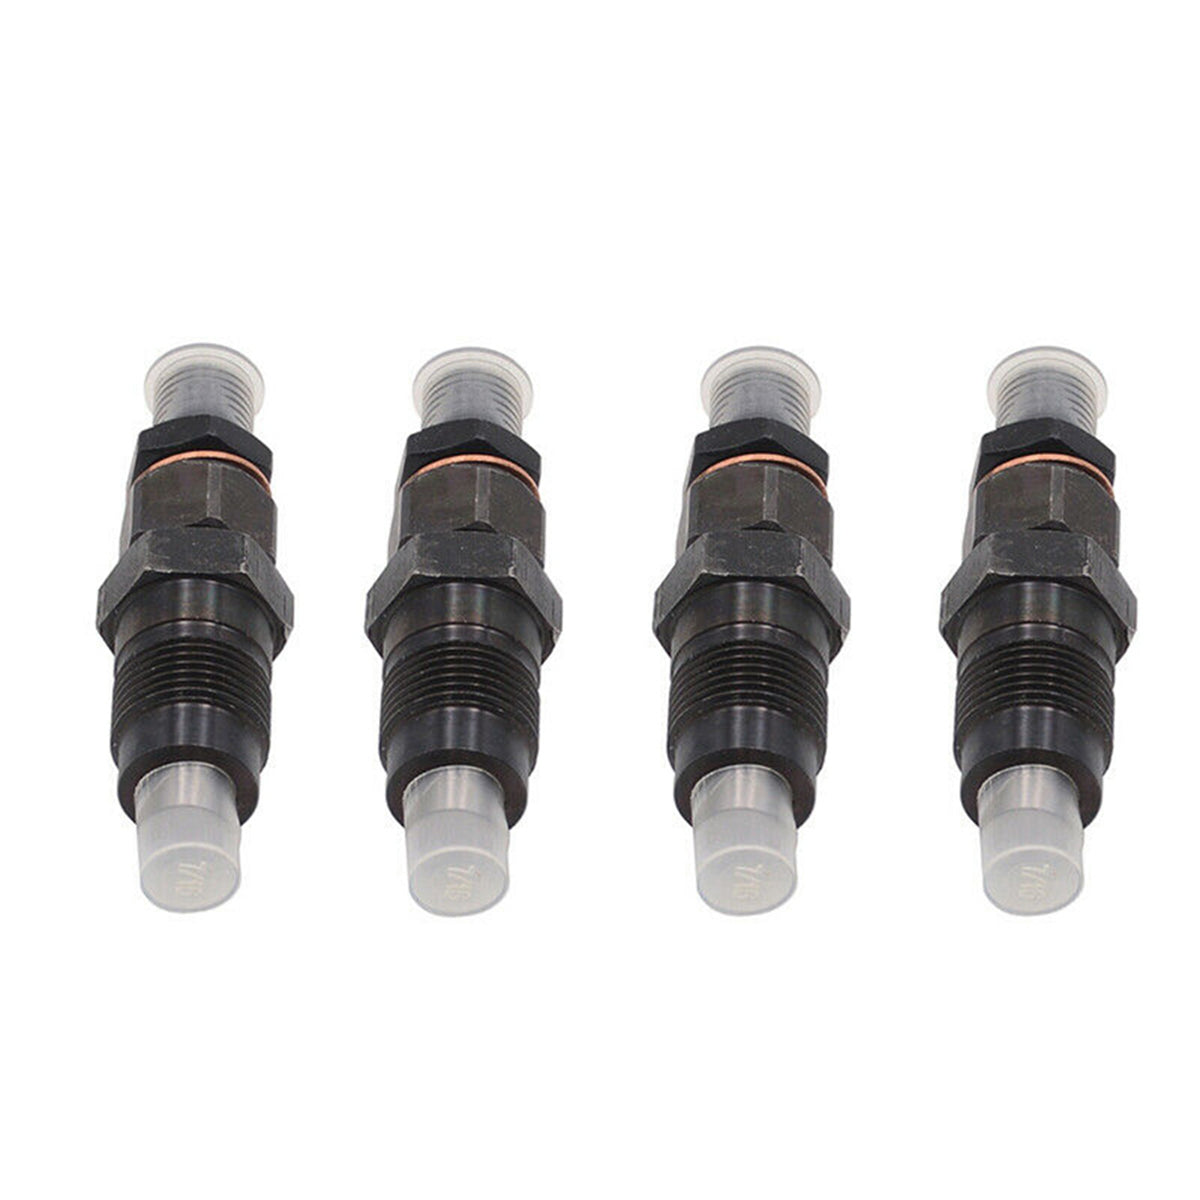 Fuel Injector 252-1446, Fuel Injector for Caterpillar Cat, Daysyore Fuel Injector, Car Fuel Injector, Auto Fuel Injector